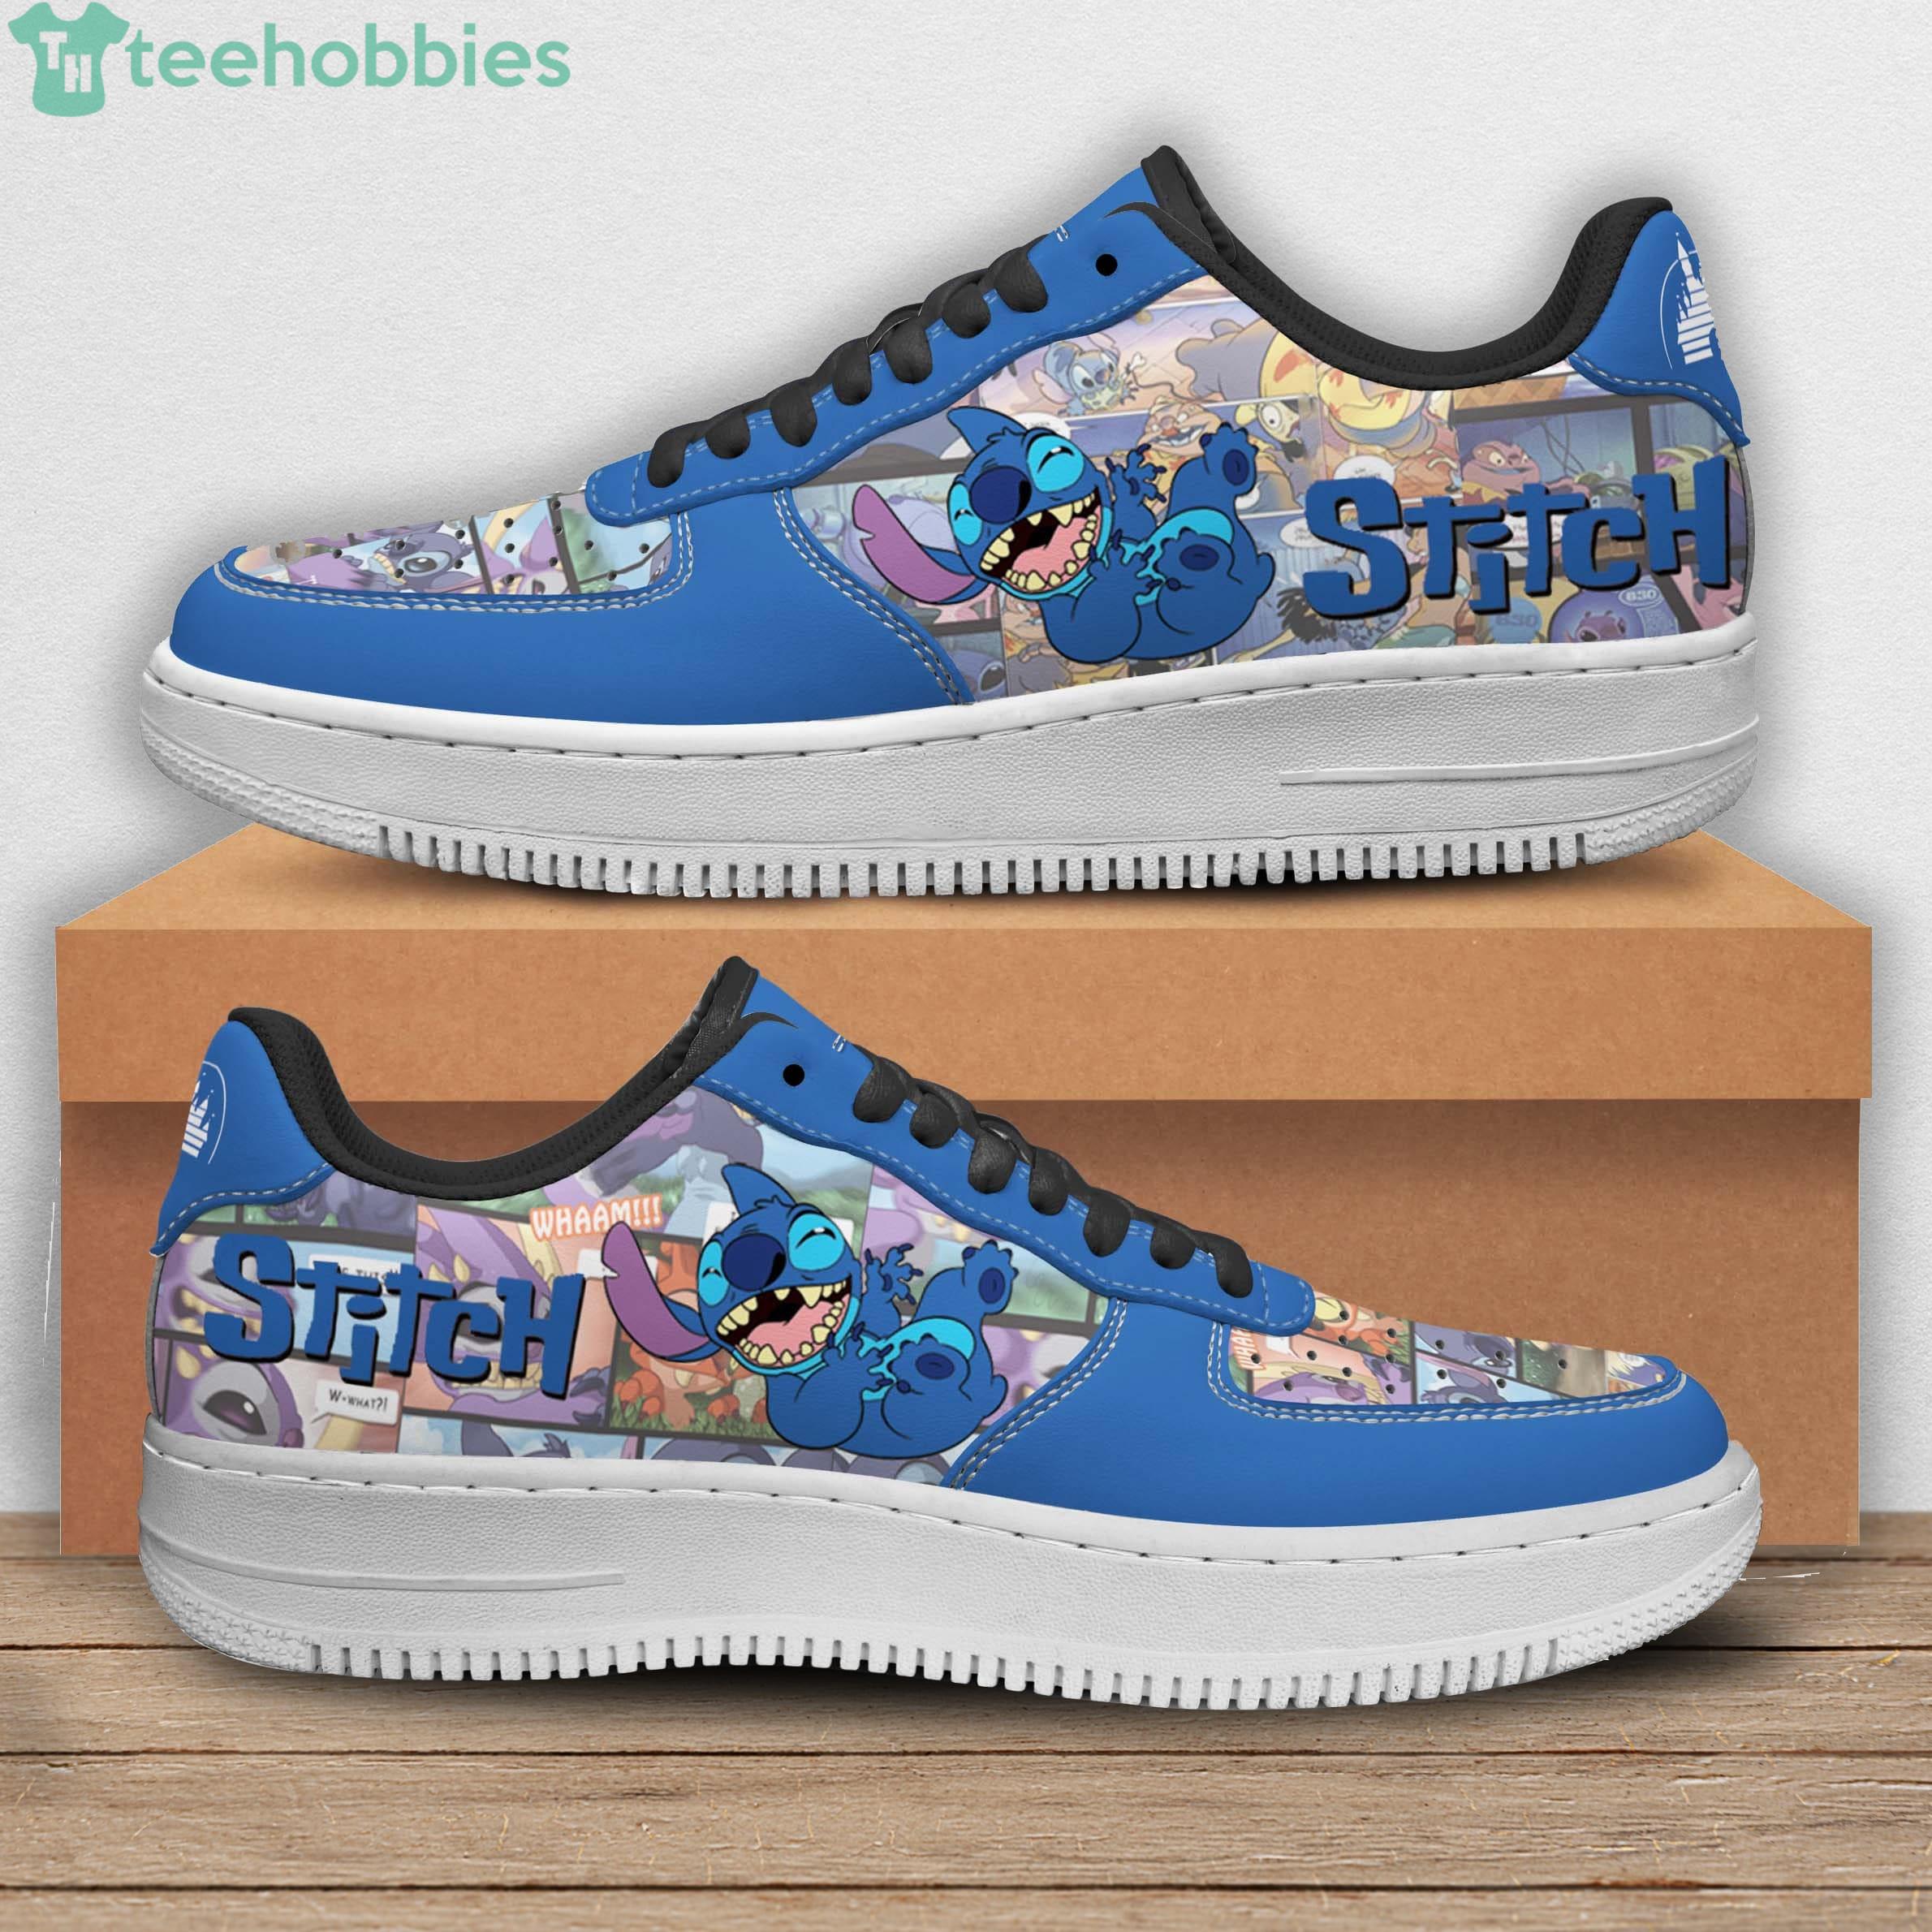 Air Force 1 Custom Low Cartoon Chicago Red Shoes White Black